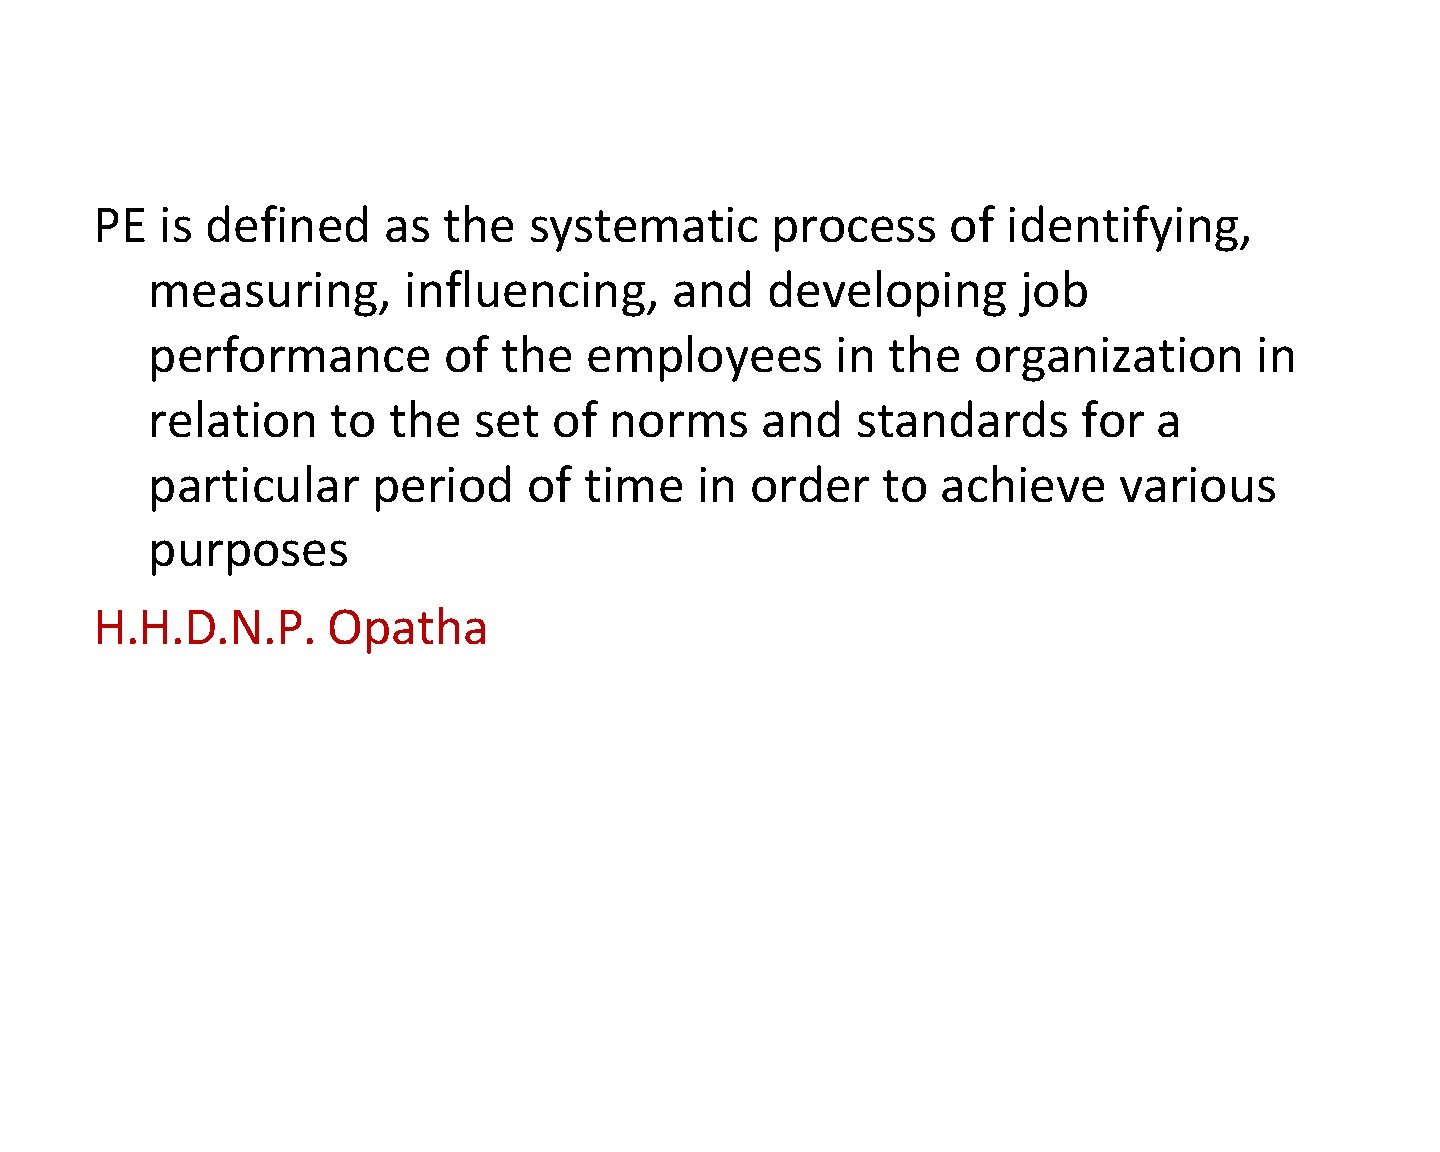 PE is defined as the systematic process of identifying, measuring, influencing, and developing job